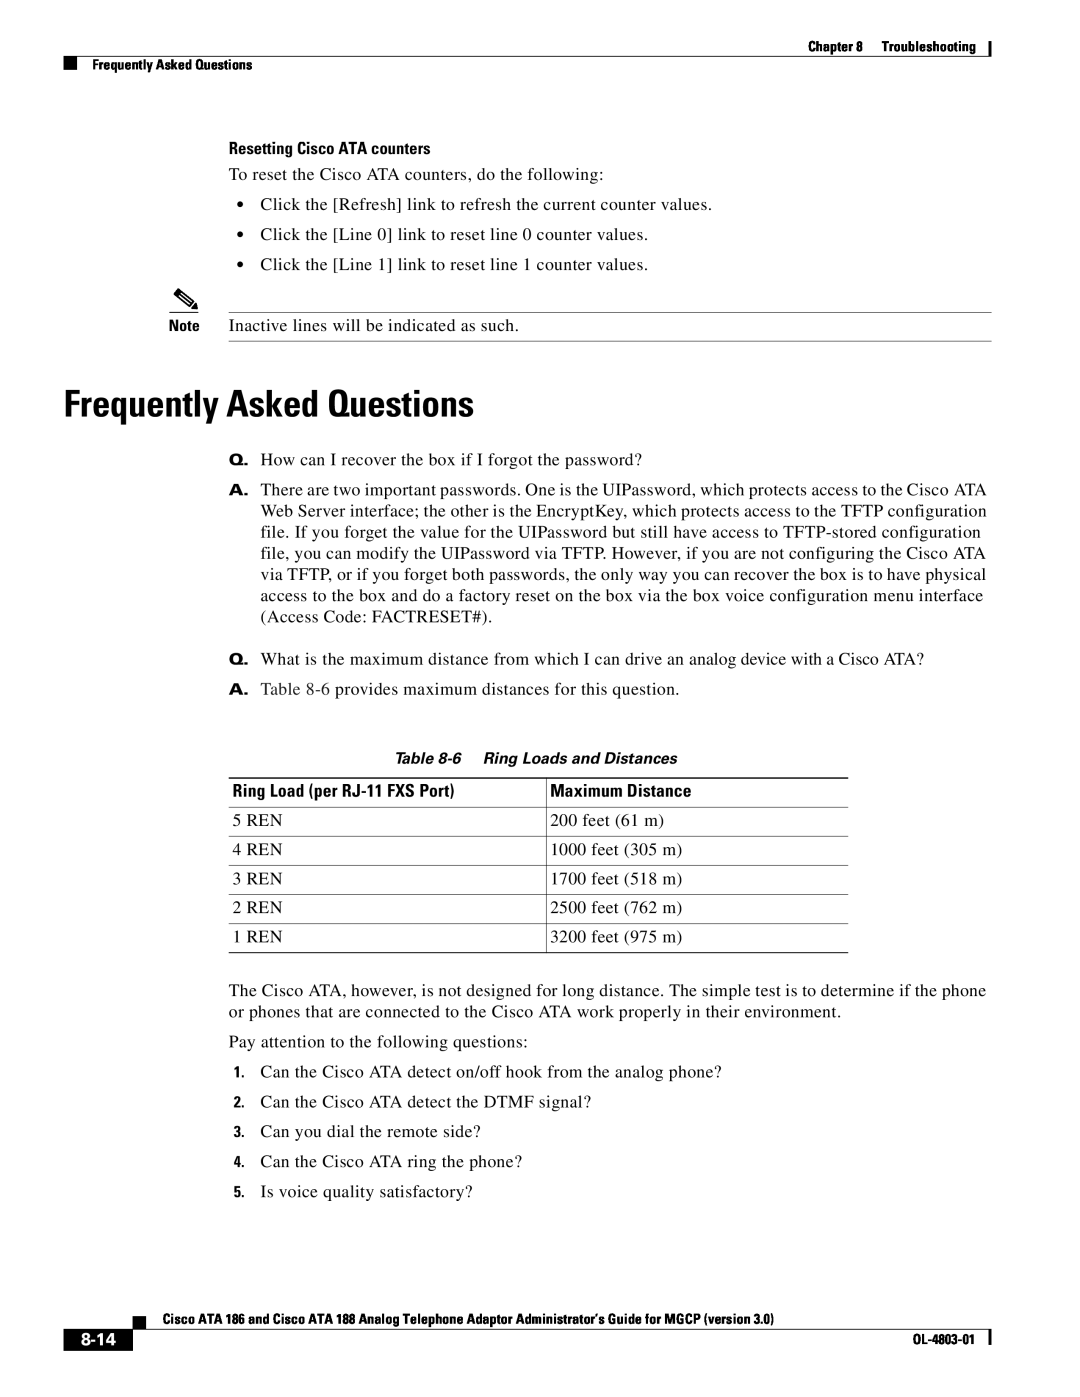 Cisco Systems ATA 186 manual Frequently Asked Questions, Resetting Cisco ATA counters, Ring Load per RJ-11 FXS Port, 8-14 